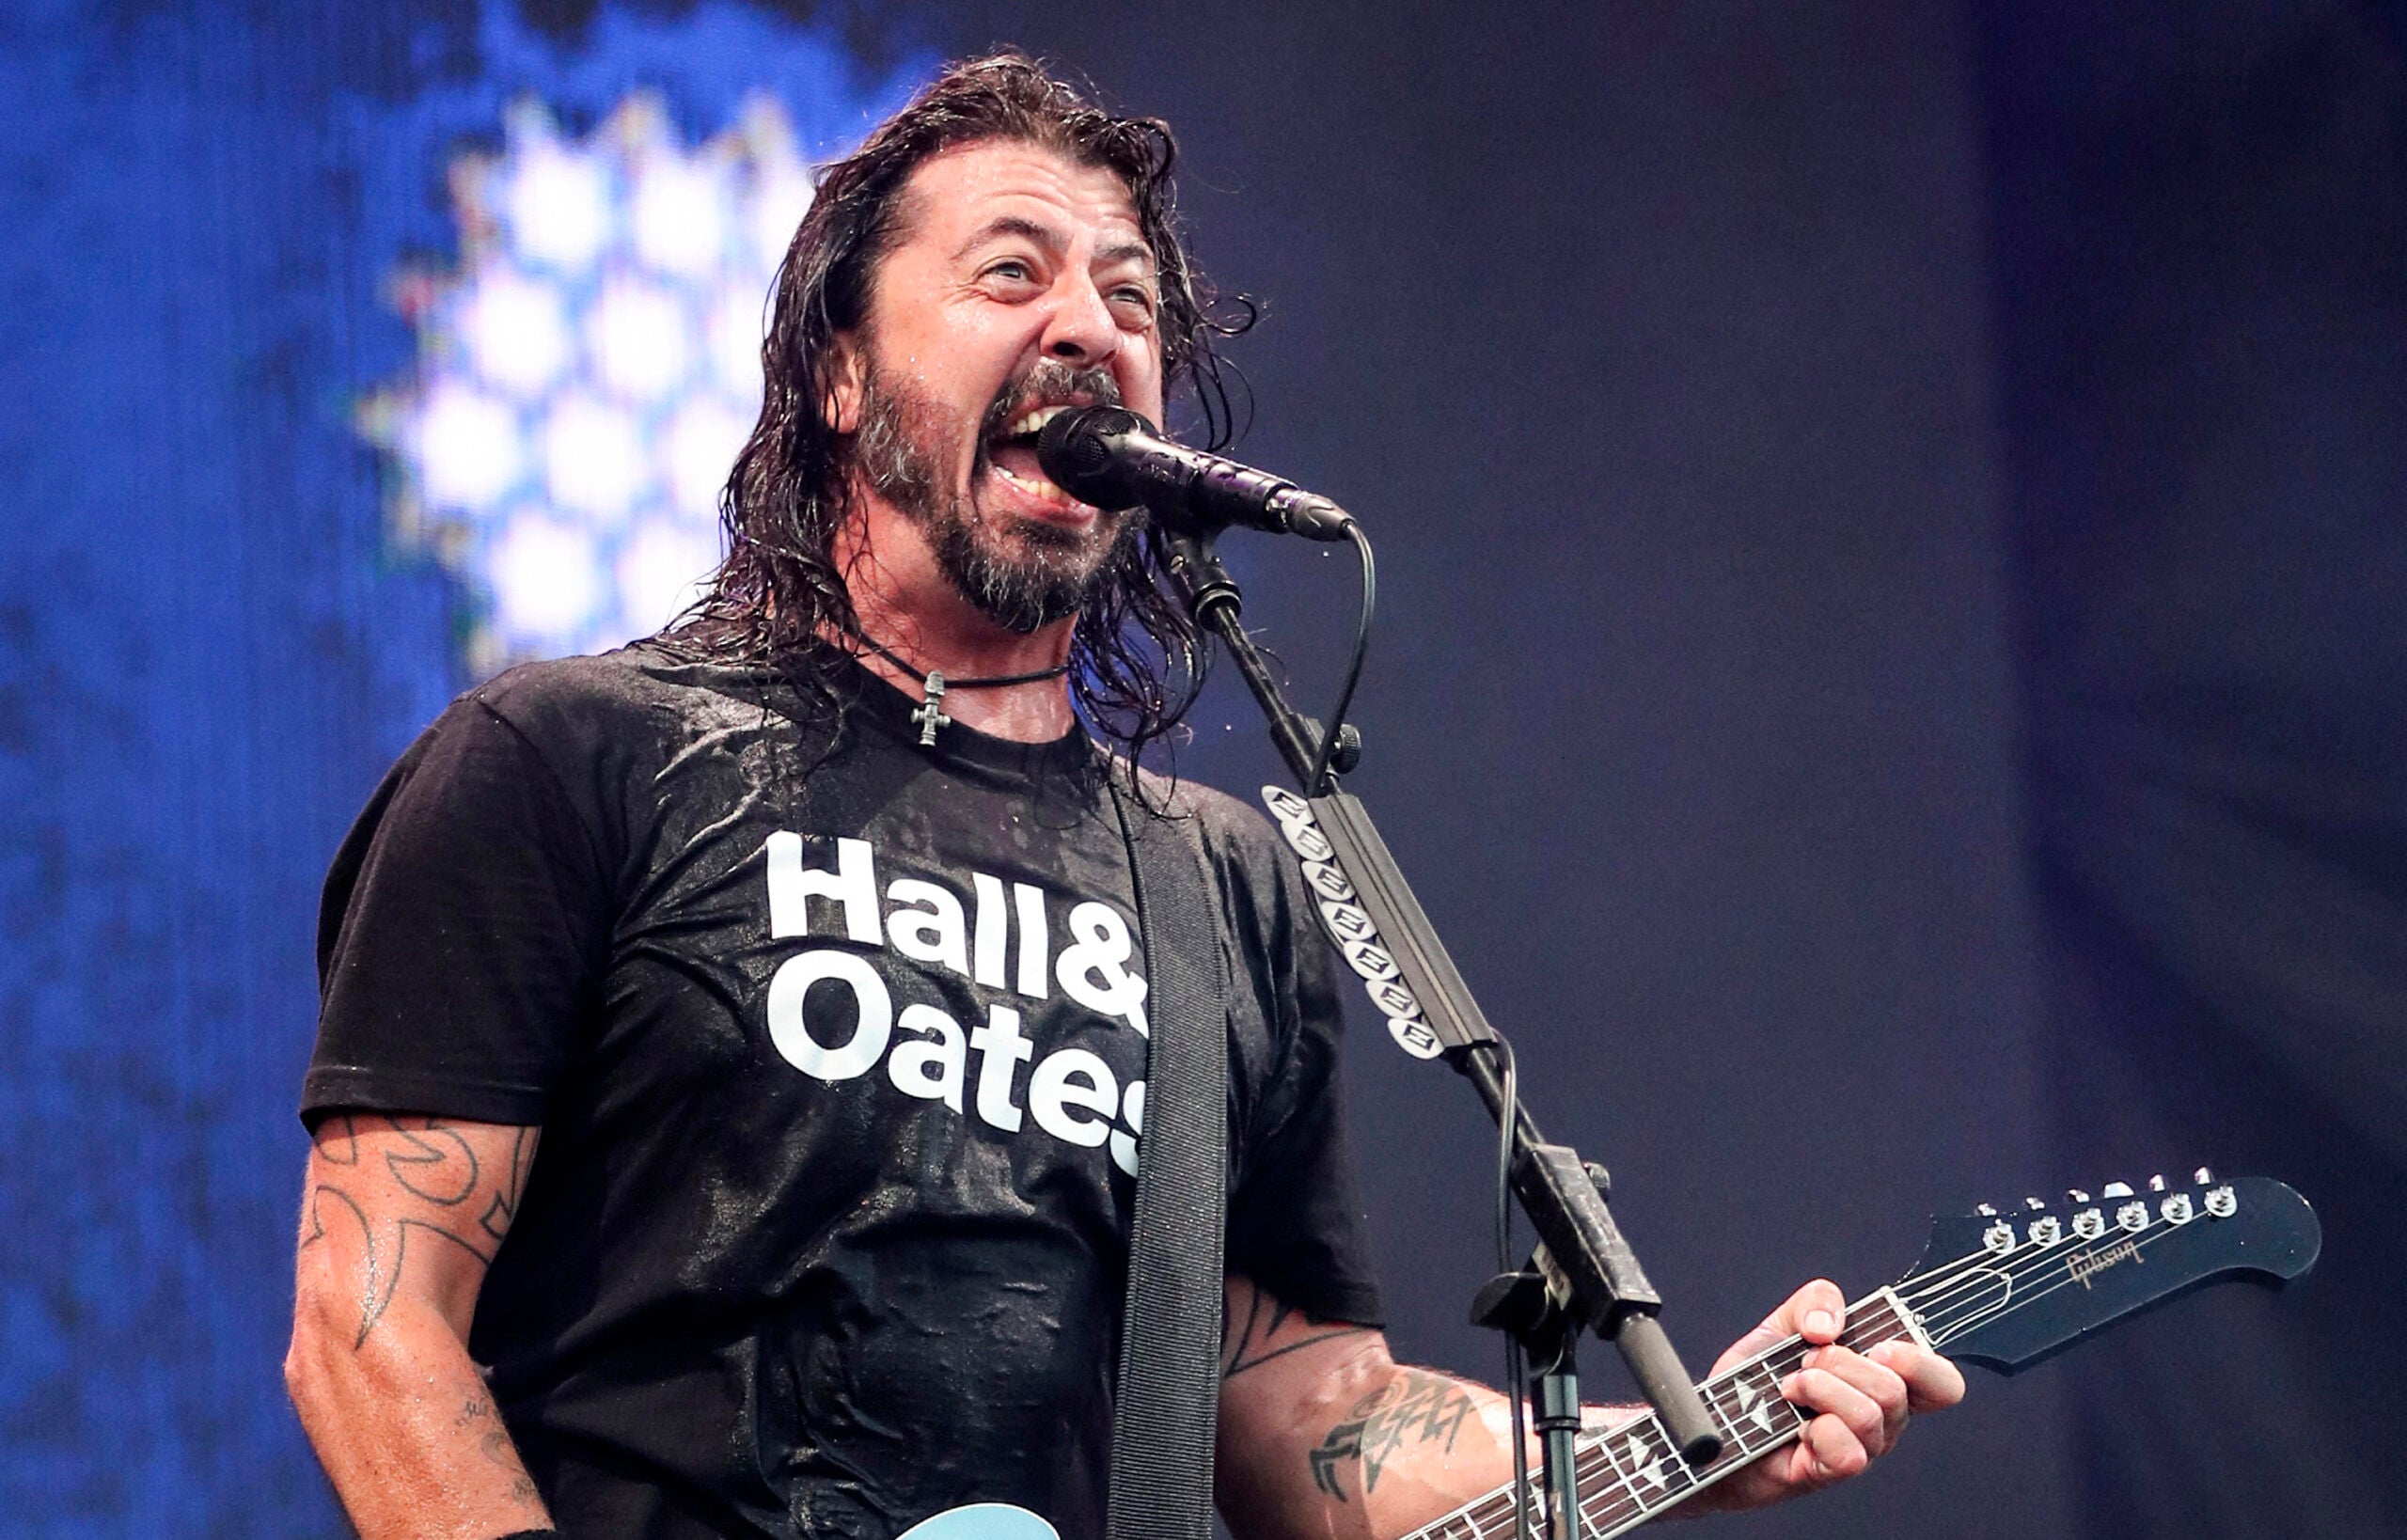 Dave Grohl of Foo Fighters.